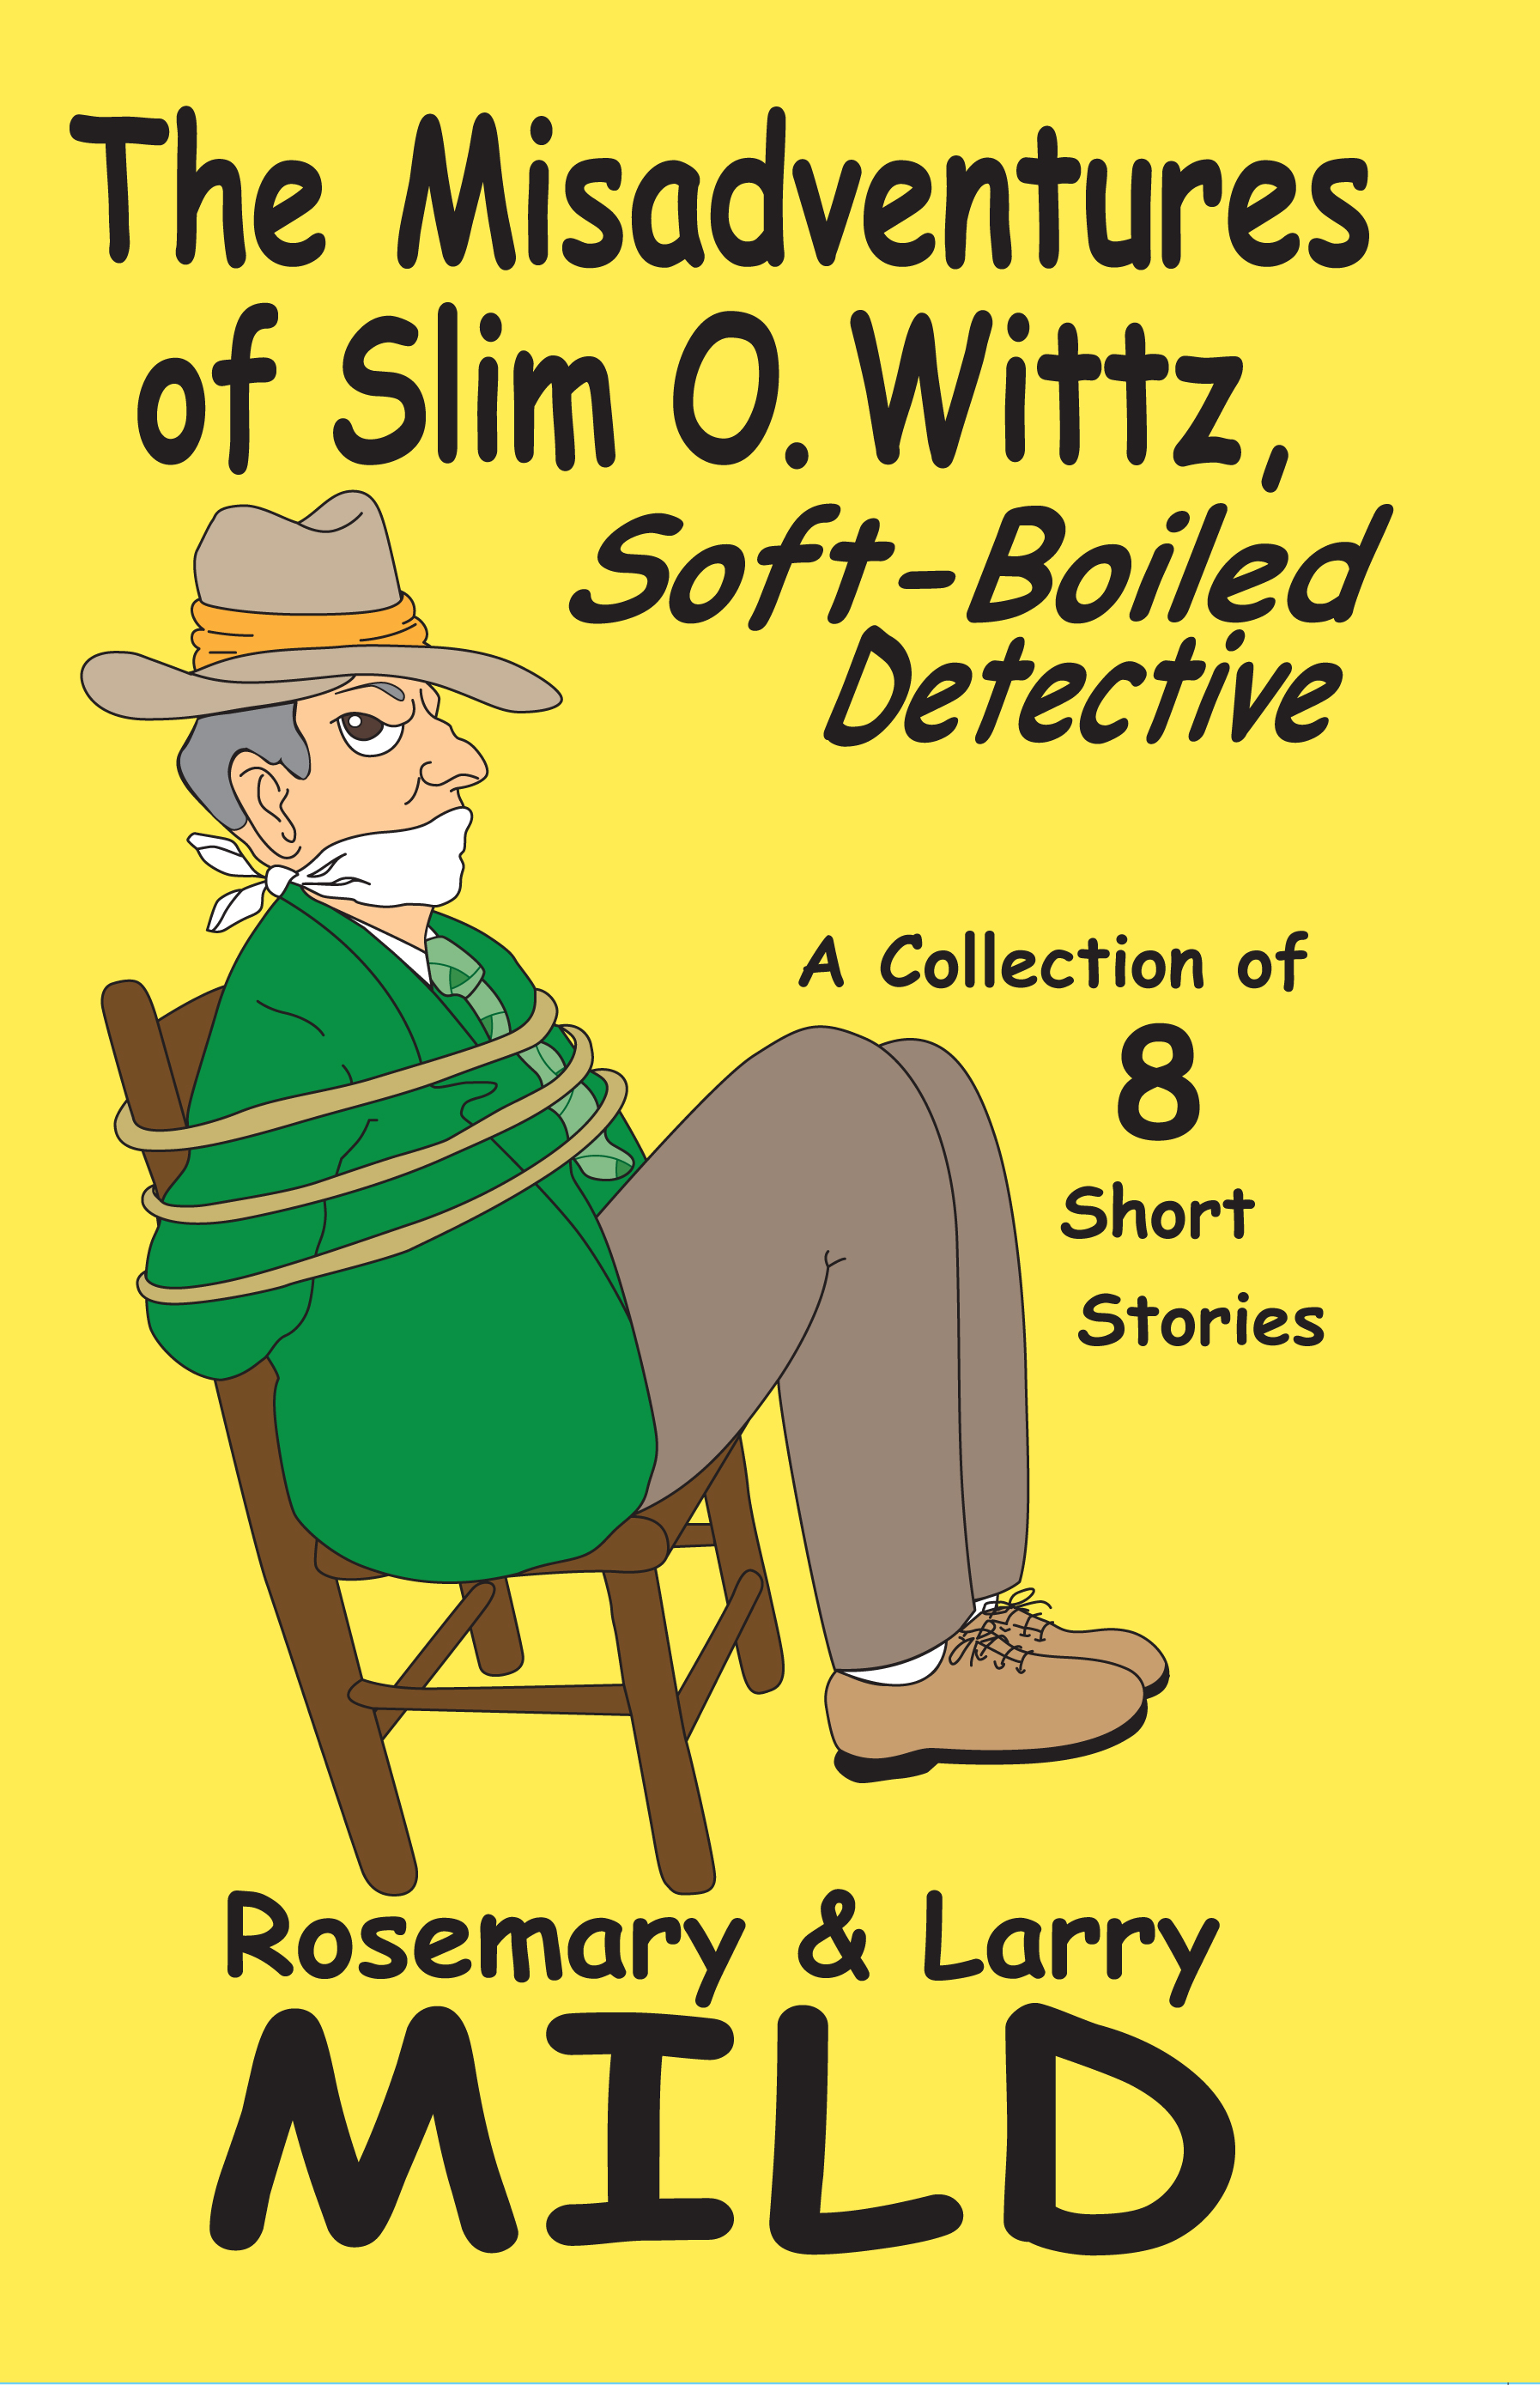 The Misadventures of Slim O. Wittz, Soft Boiled Detective by Rosemary and Larry Mild